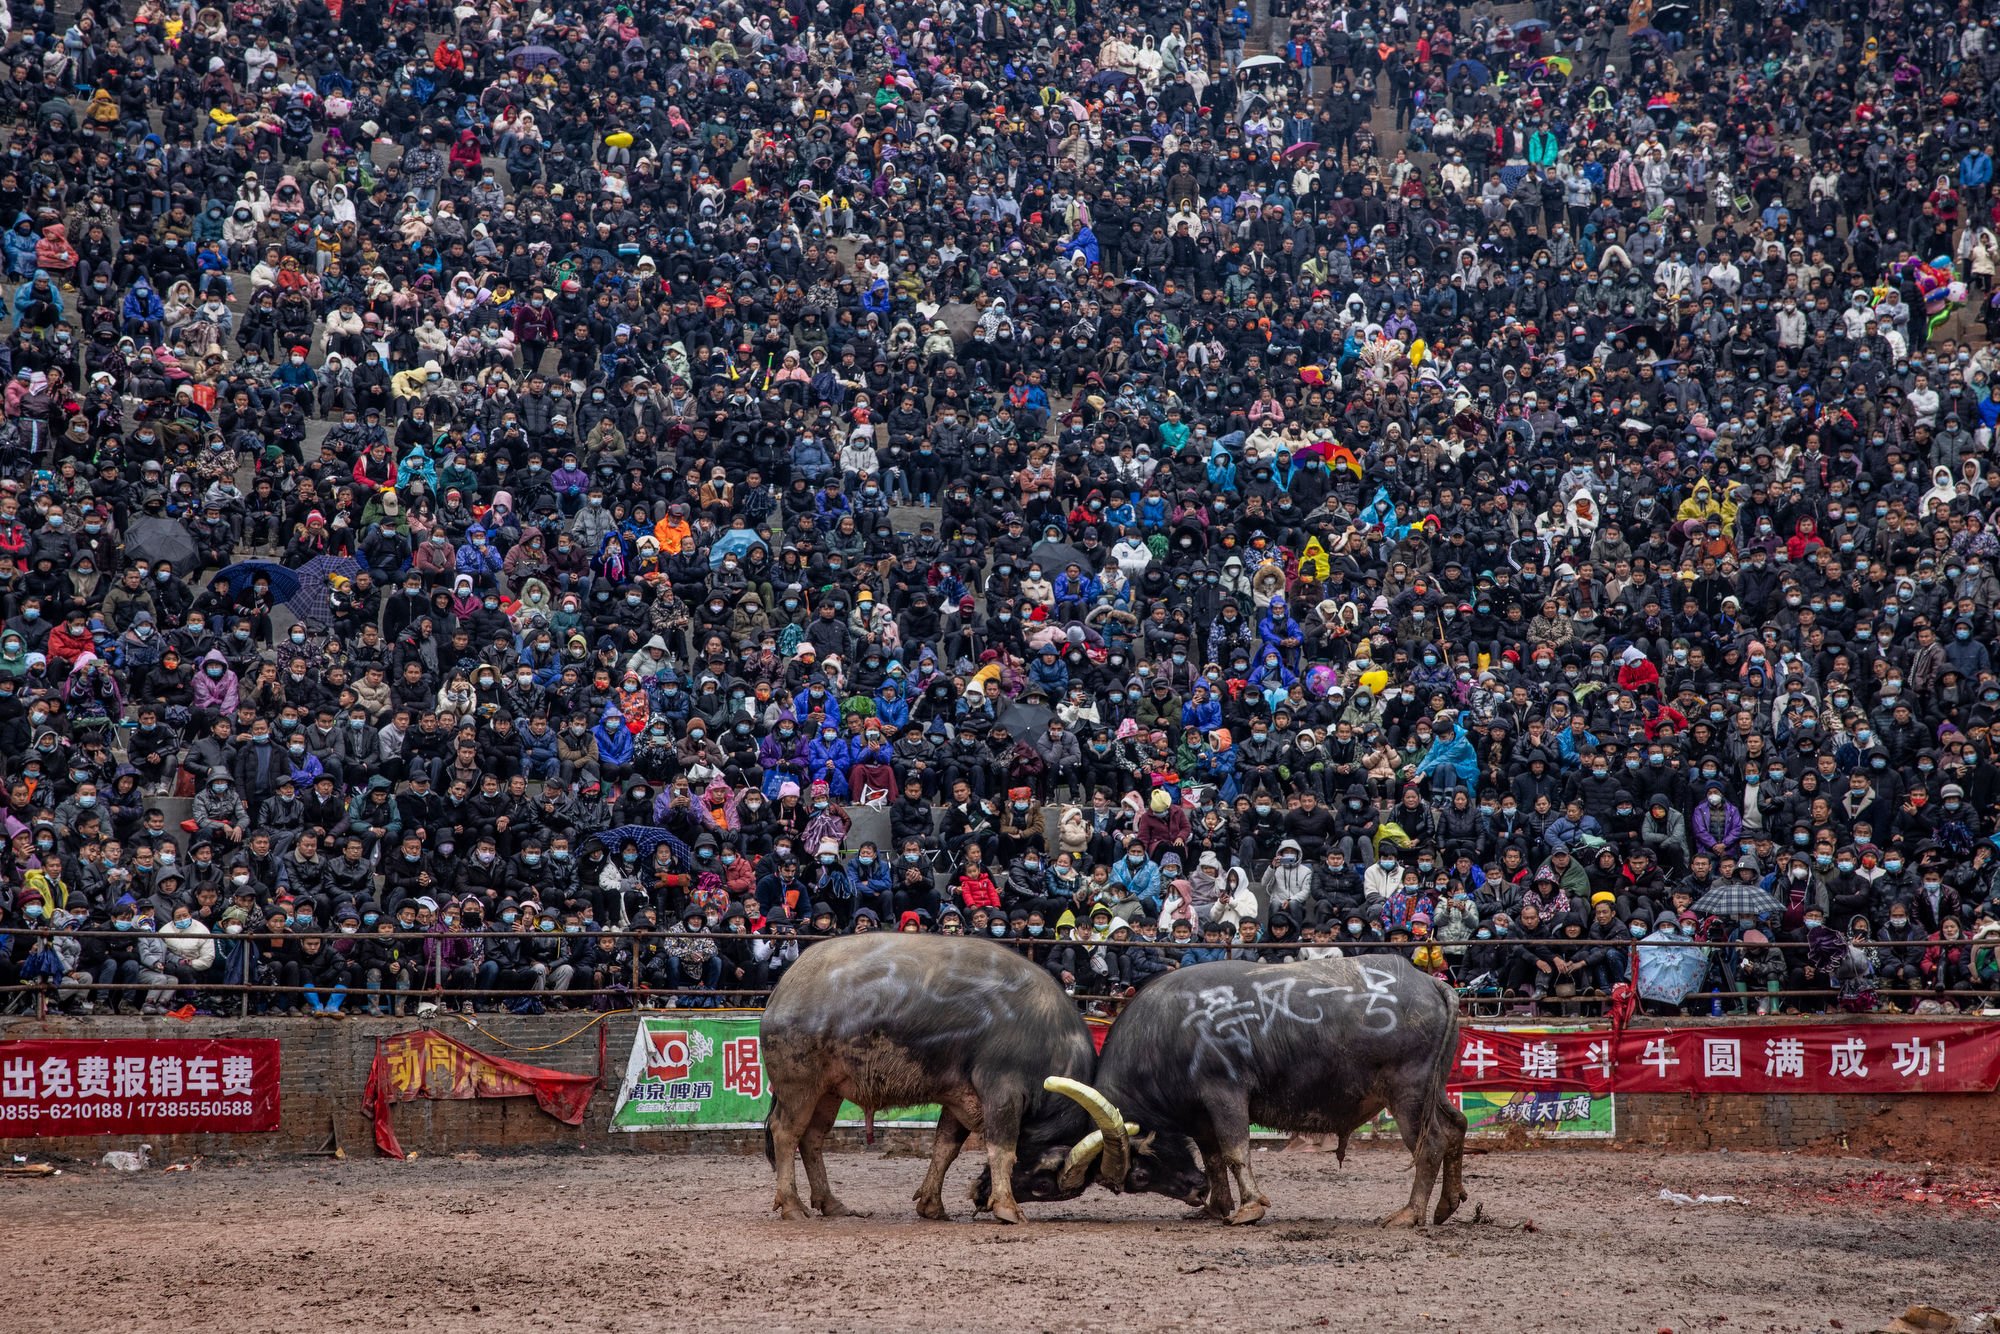  Two buffalos locked together during the match. The winner is decided when his opponent runs away. If neither buffalo submits, then a draw is declared. The majority of fights finish without any injuries and some finish even without contact, as they h